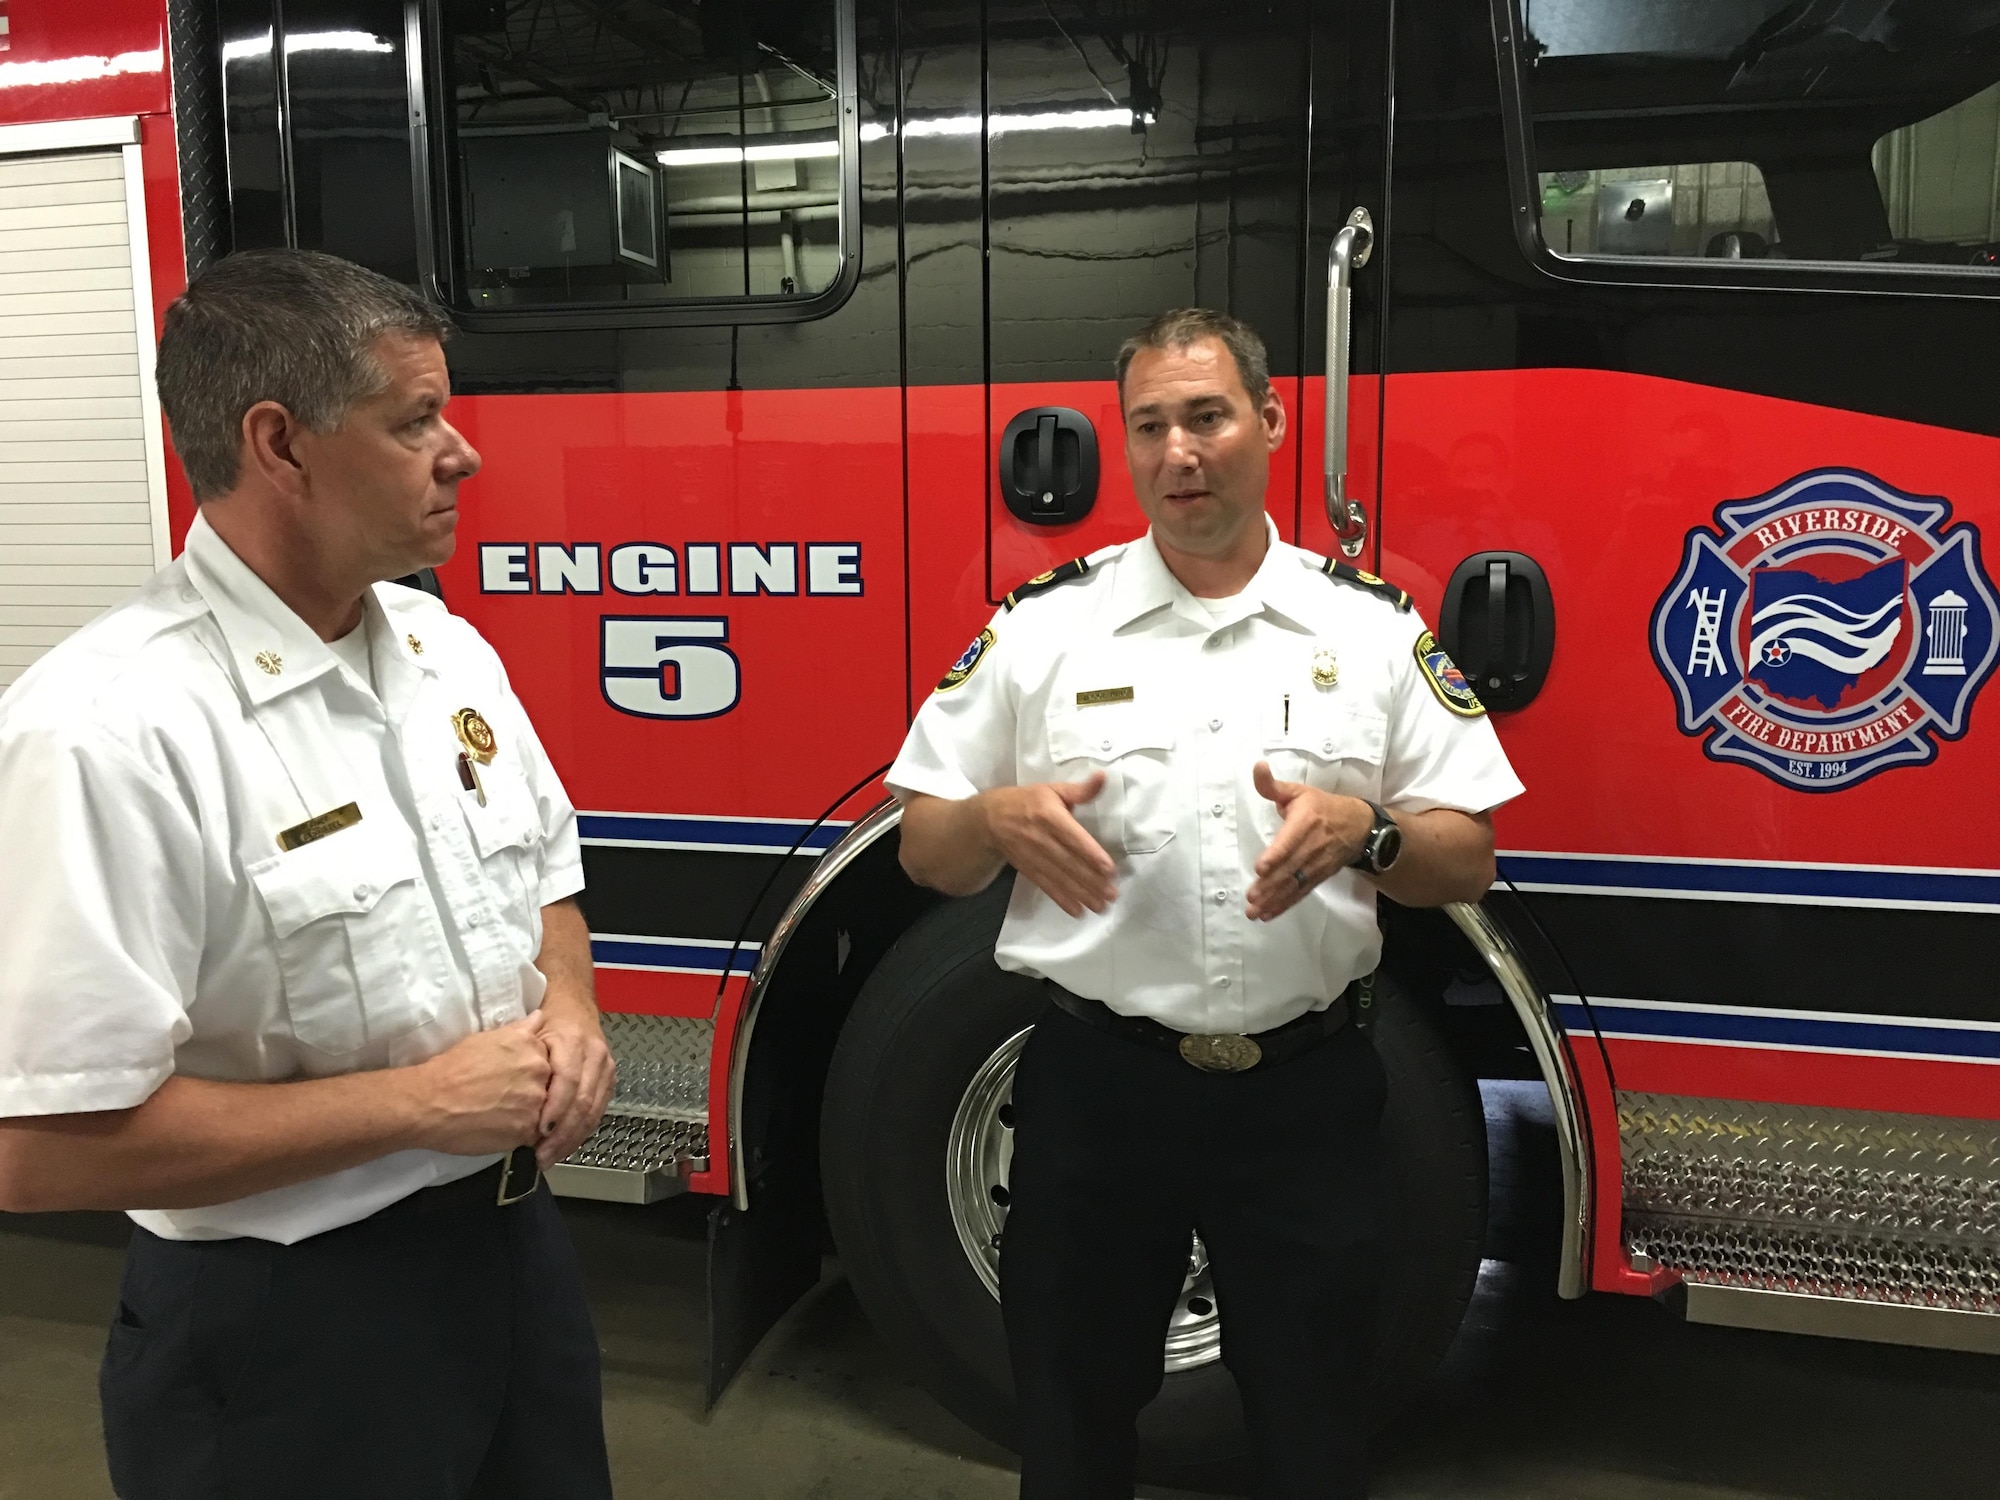 Fire Chief Jacob King, Wright-Patterson Air Force Base Fire Emergency Services (right) discusses mutual aid operations with Fire Chief Daniel Stitzel, city of Riverside Fire Department, in front of Riverside’s newest fire engine June 9, 2017 in Riverside, Ohio. Both departments routinely provide mutual aid to one another in the form of firefighting, medical, diving and other emergency response services. (U.S. Air Force photo/John Harrington)